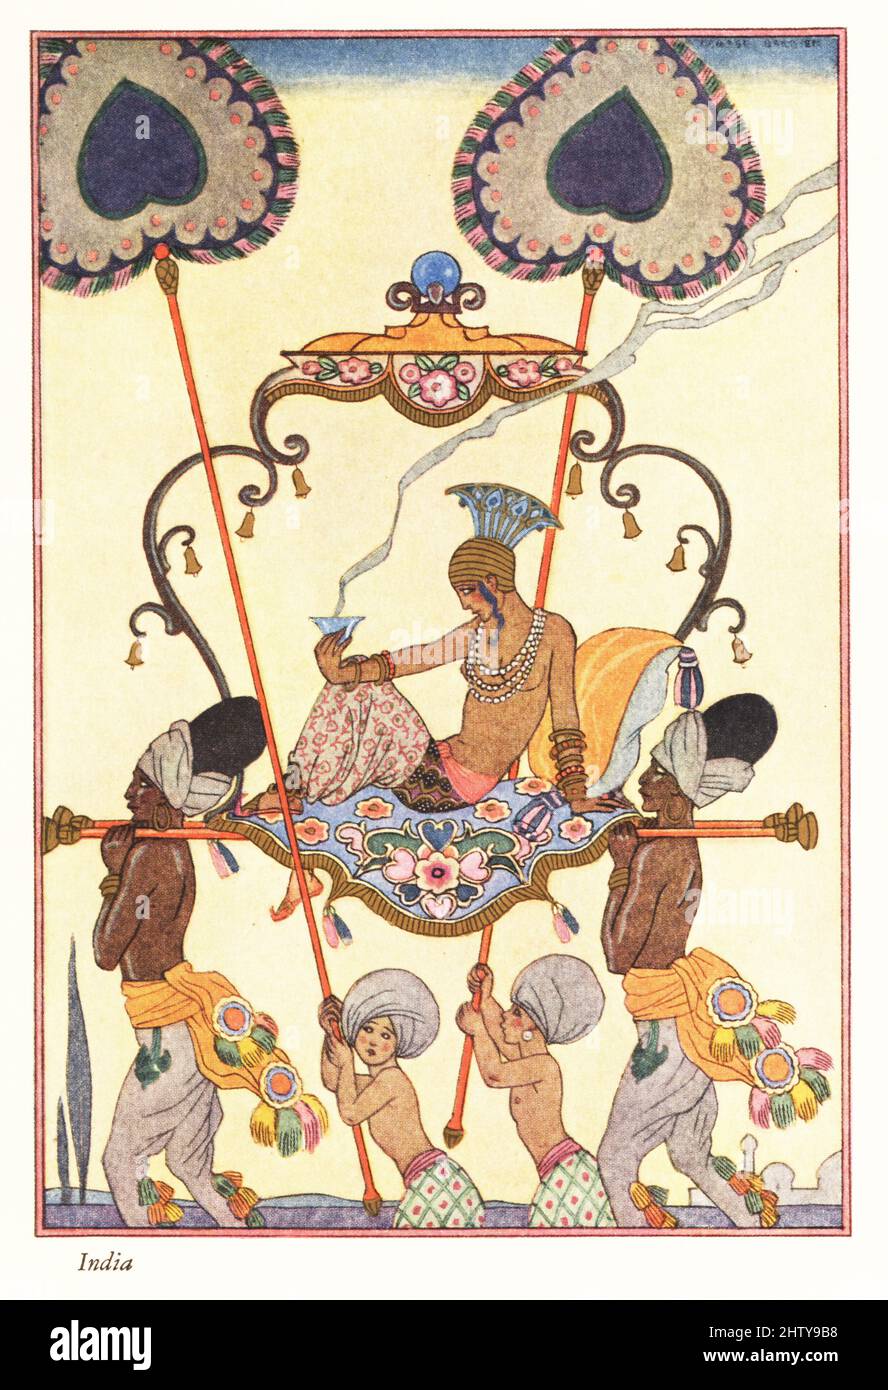 A noble woman burns incense while being carried on a palanquin, ancient India. Two punkhawallahs in turbans wave large fans to keep her cool. Smithsonian-process colour print after Art Deco master George Barbier from Richard le Gallienne’s Romance of Perfume, Hudnut, New York, 1928. Stock Photo